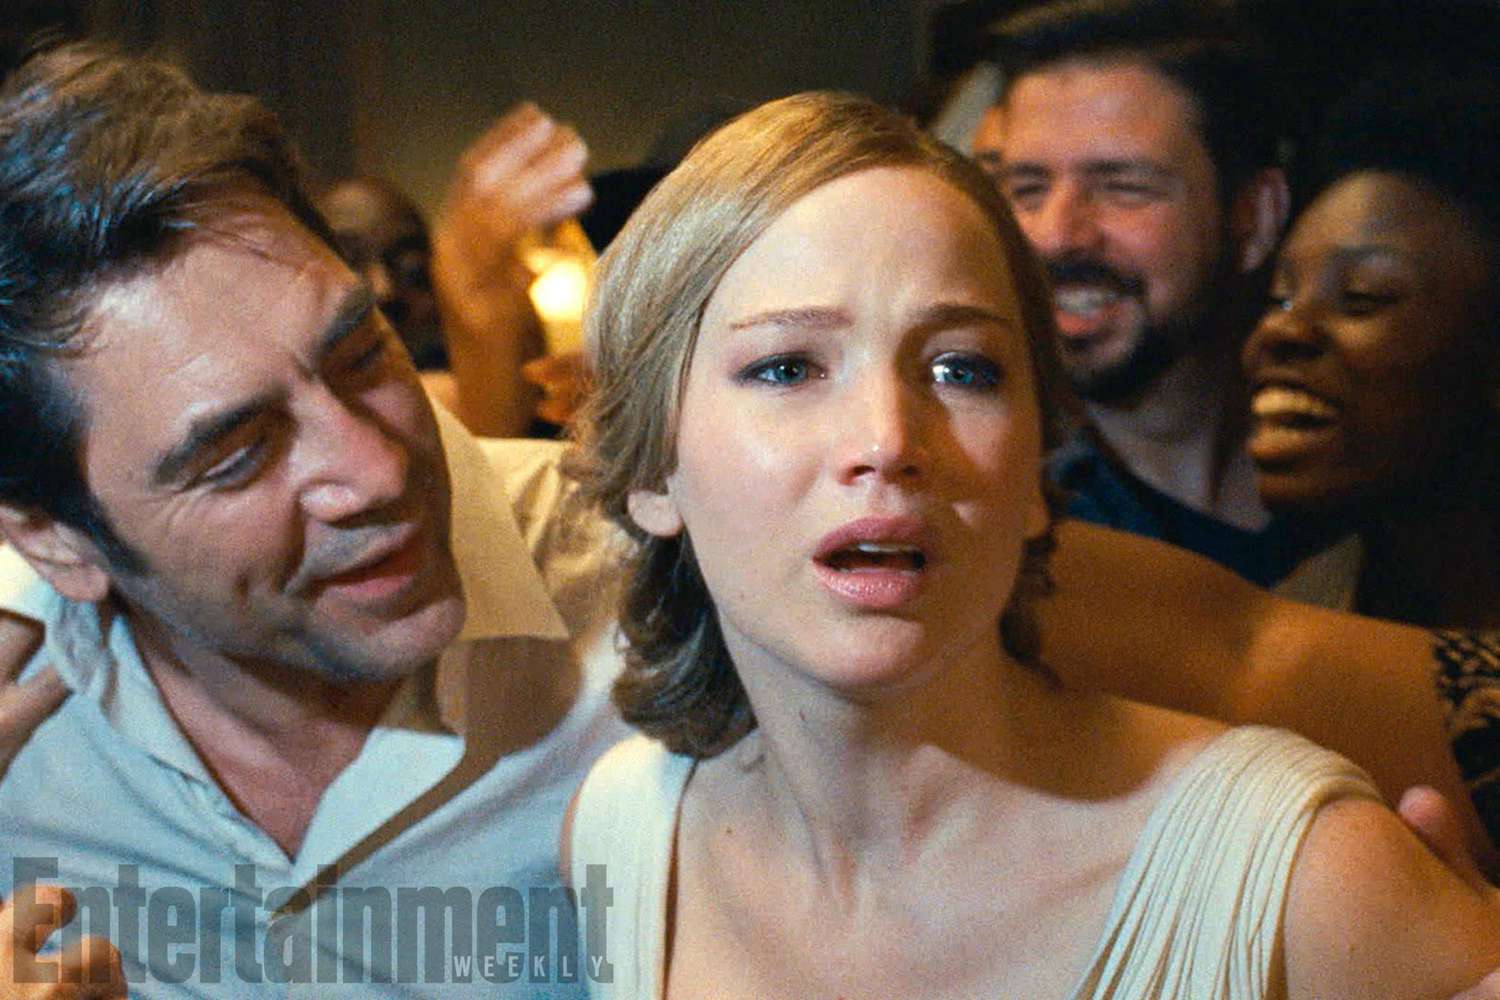 dawn kingsbury recommends mother jennifer lawrence nude pic